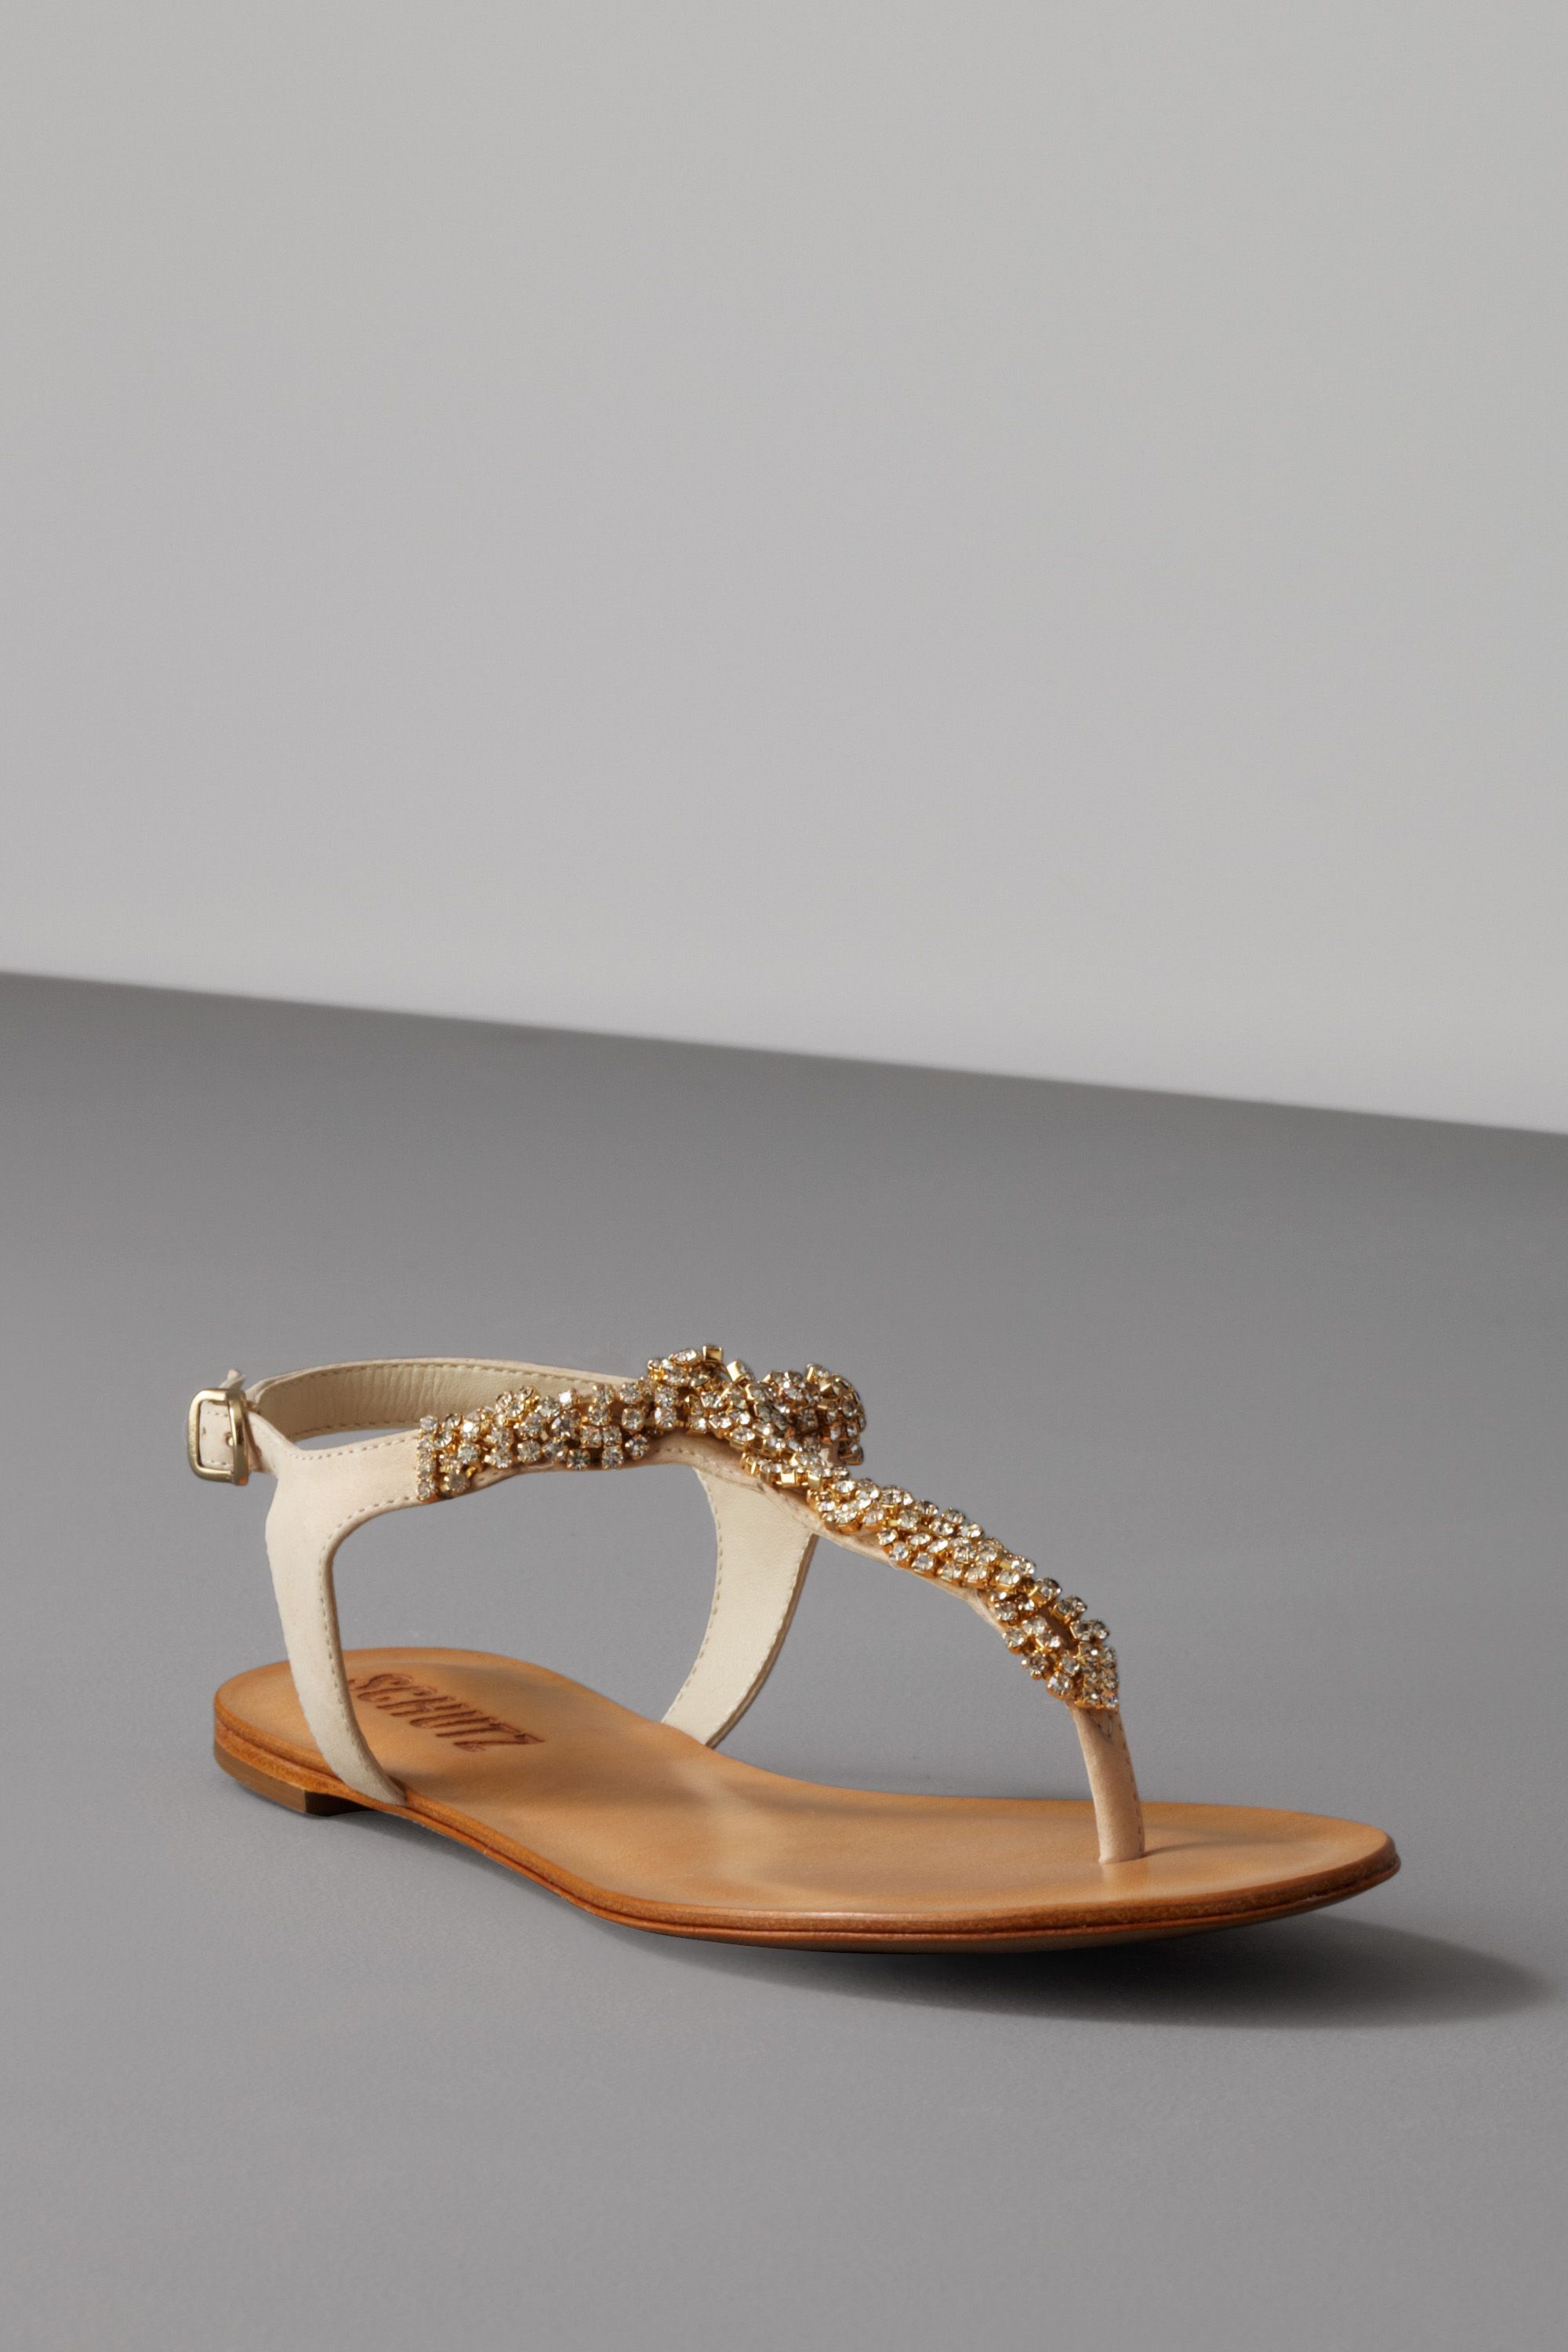 Diamond Dust Sandals in Shoes & Accessories | BHLDN